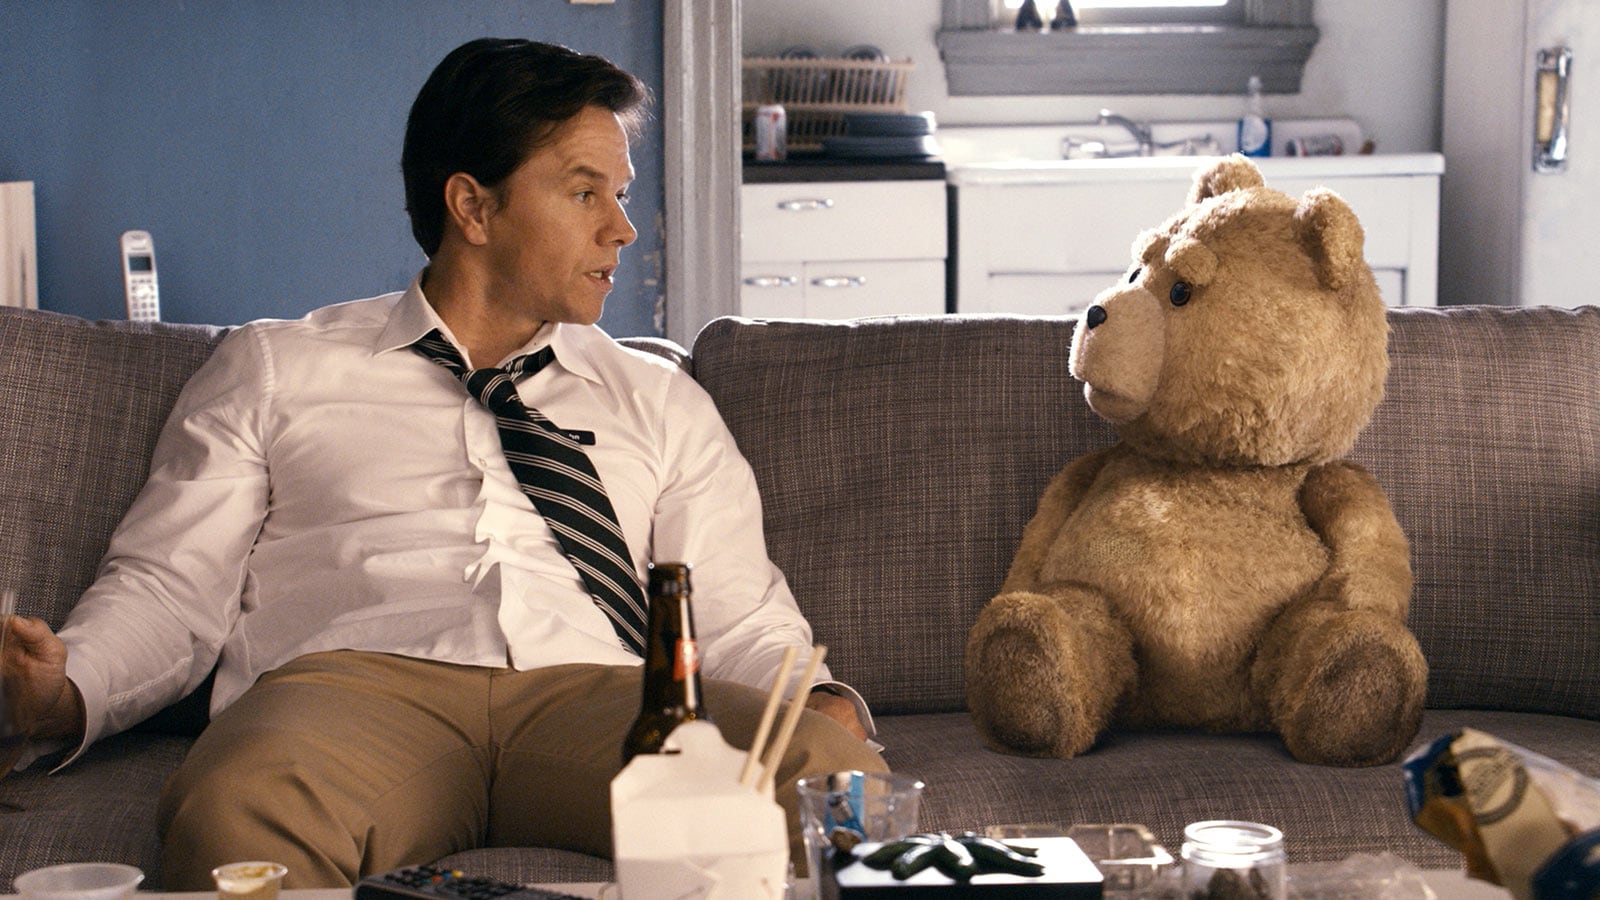 Mark Wahlberg and bear sitting in "Ted"